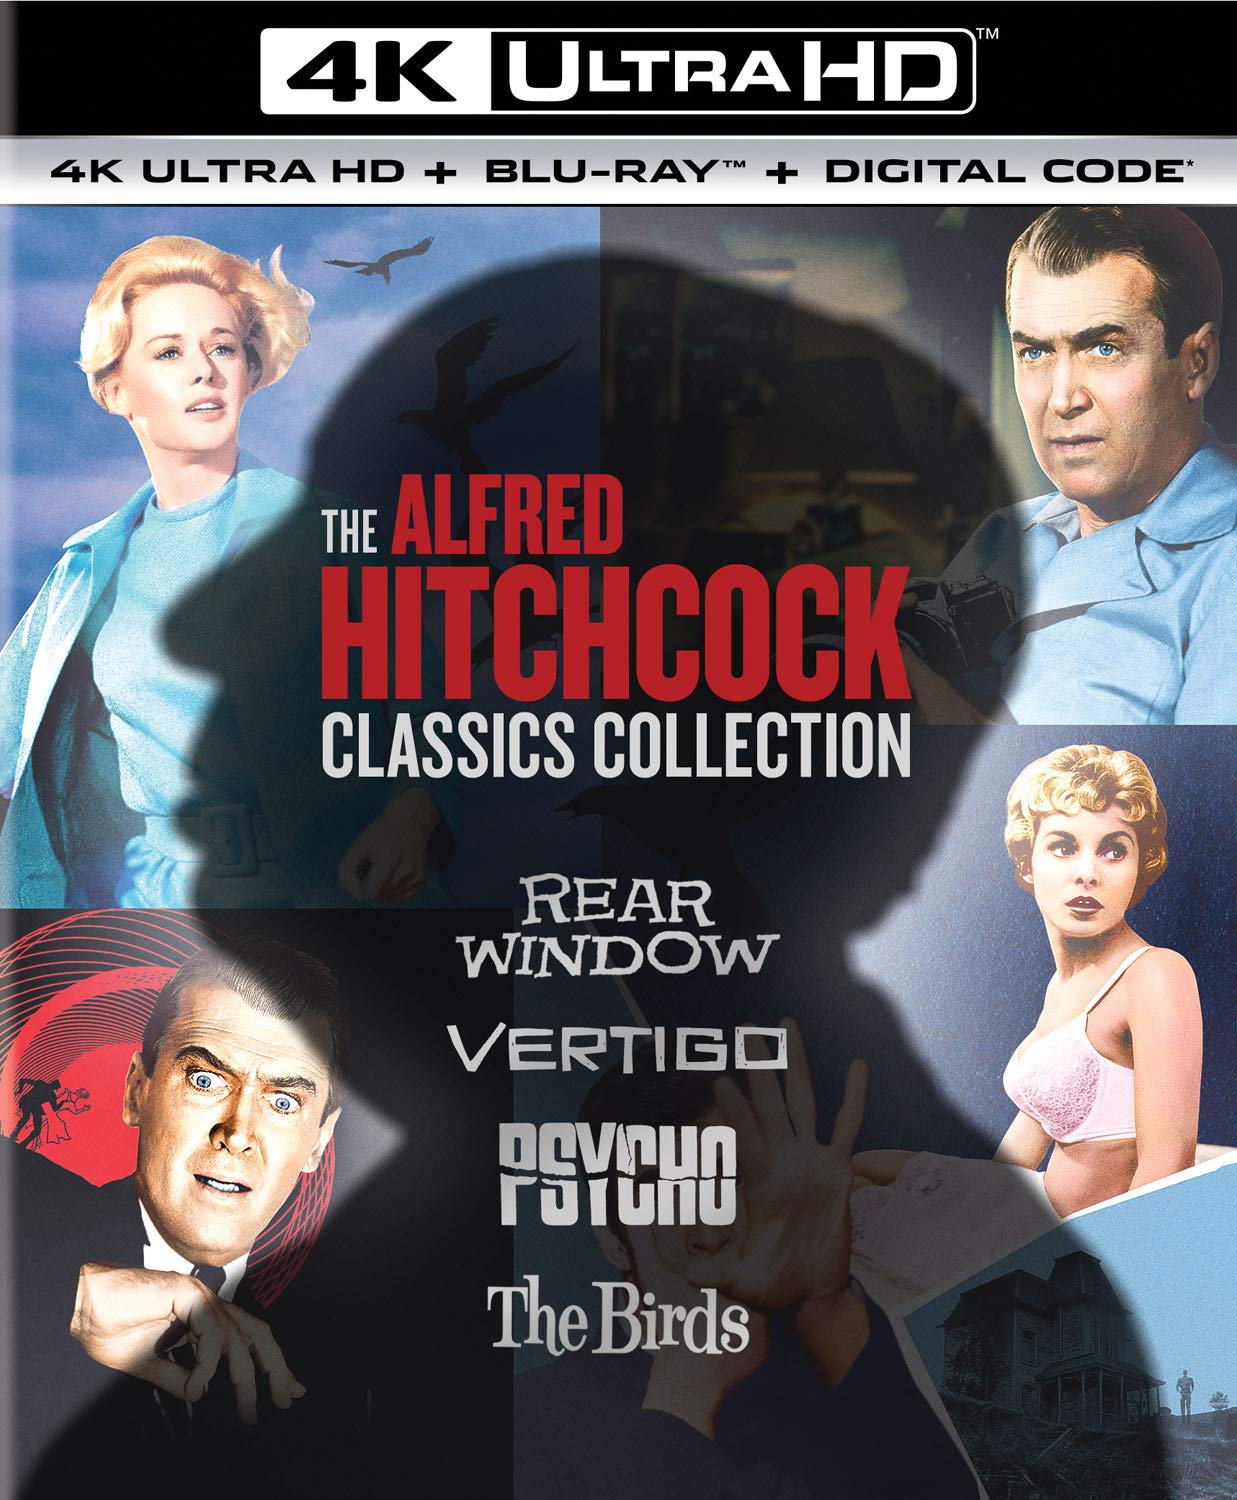 Film Intuition Review Database 4K UHD Blu-ray Review The Alfred Hitchcock Classics Collection image image